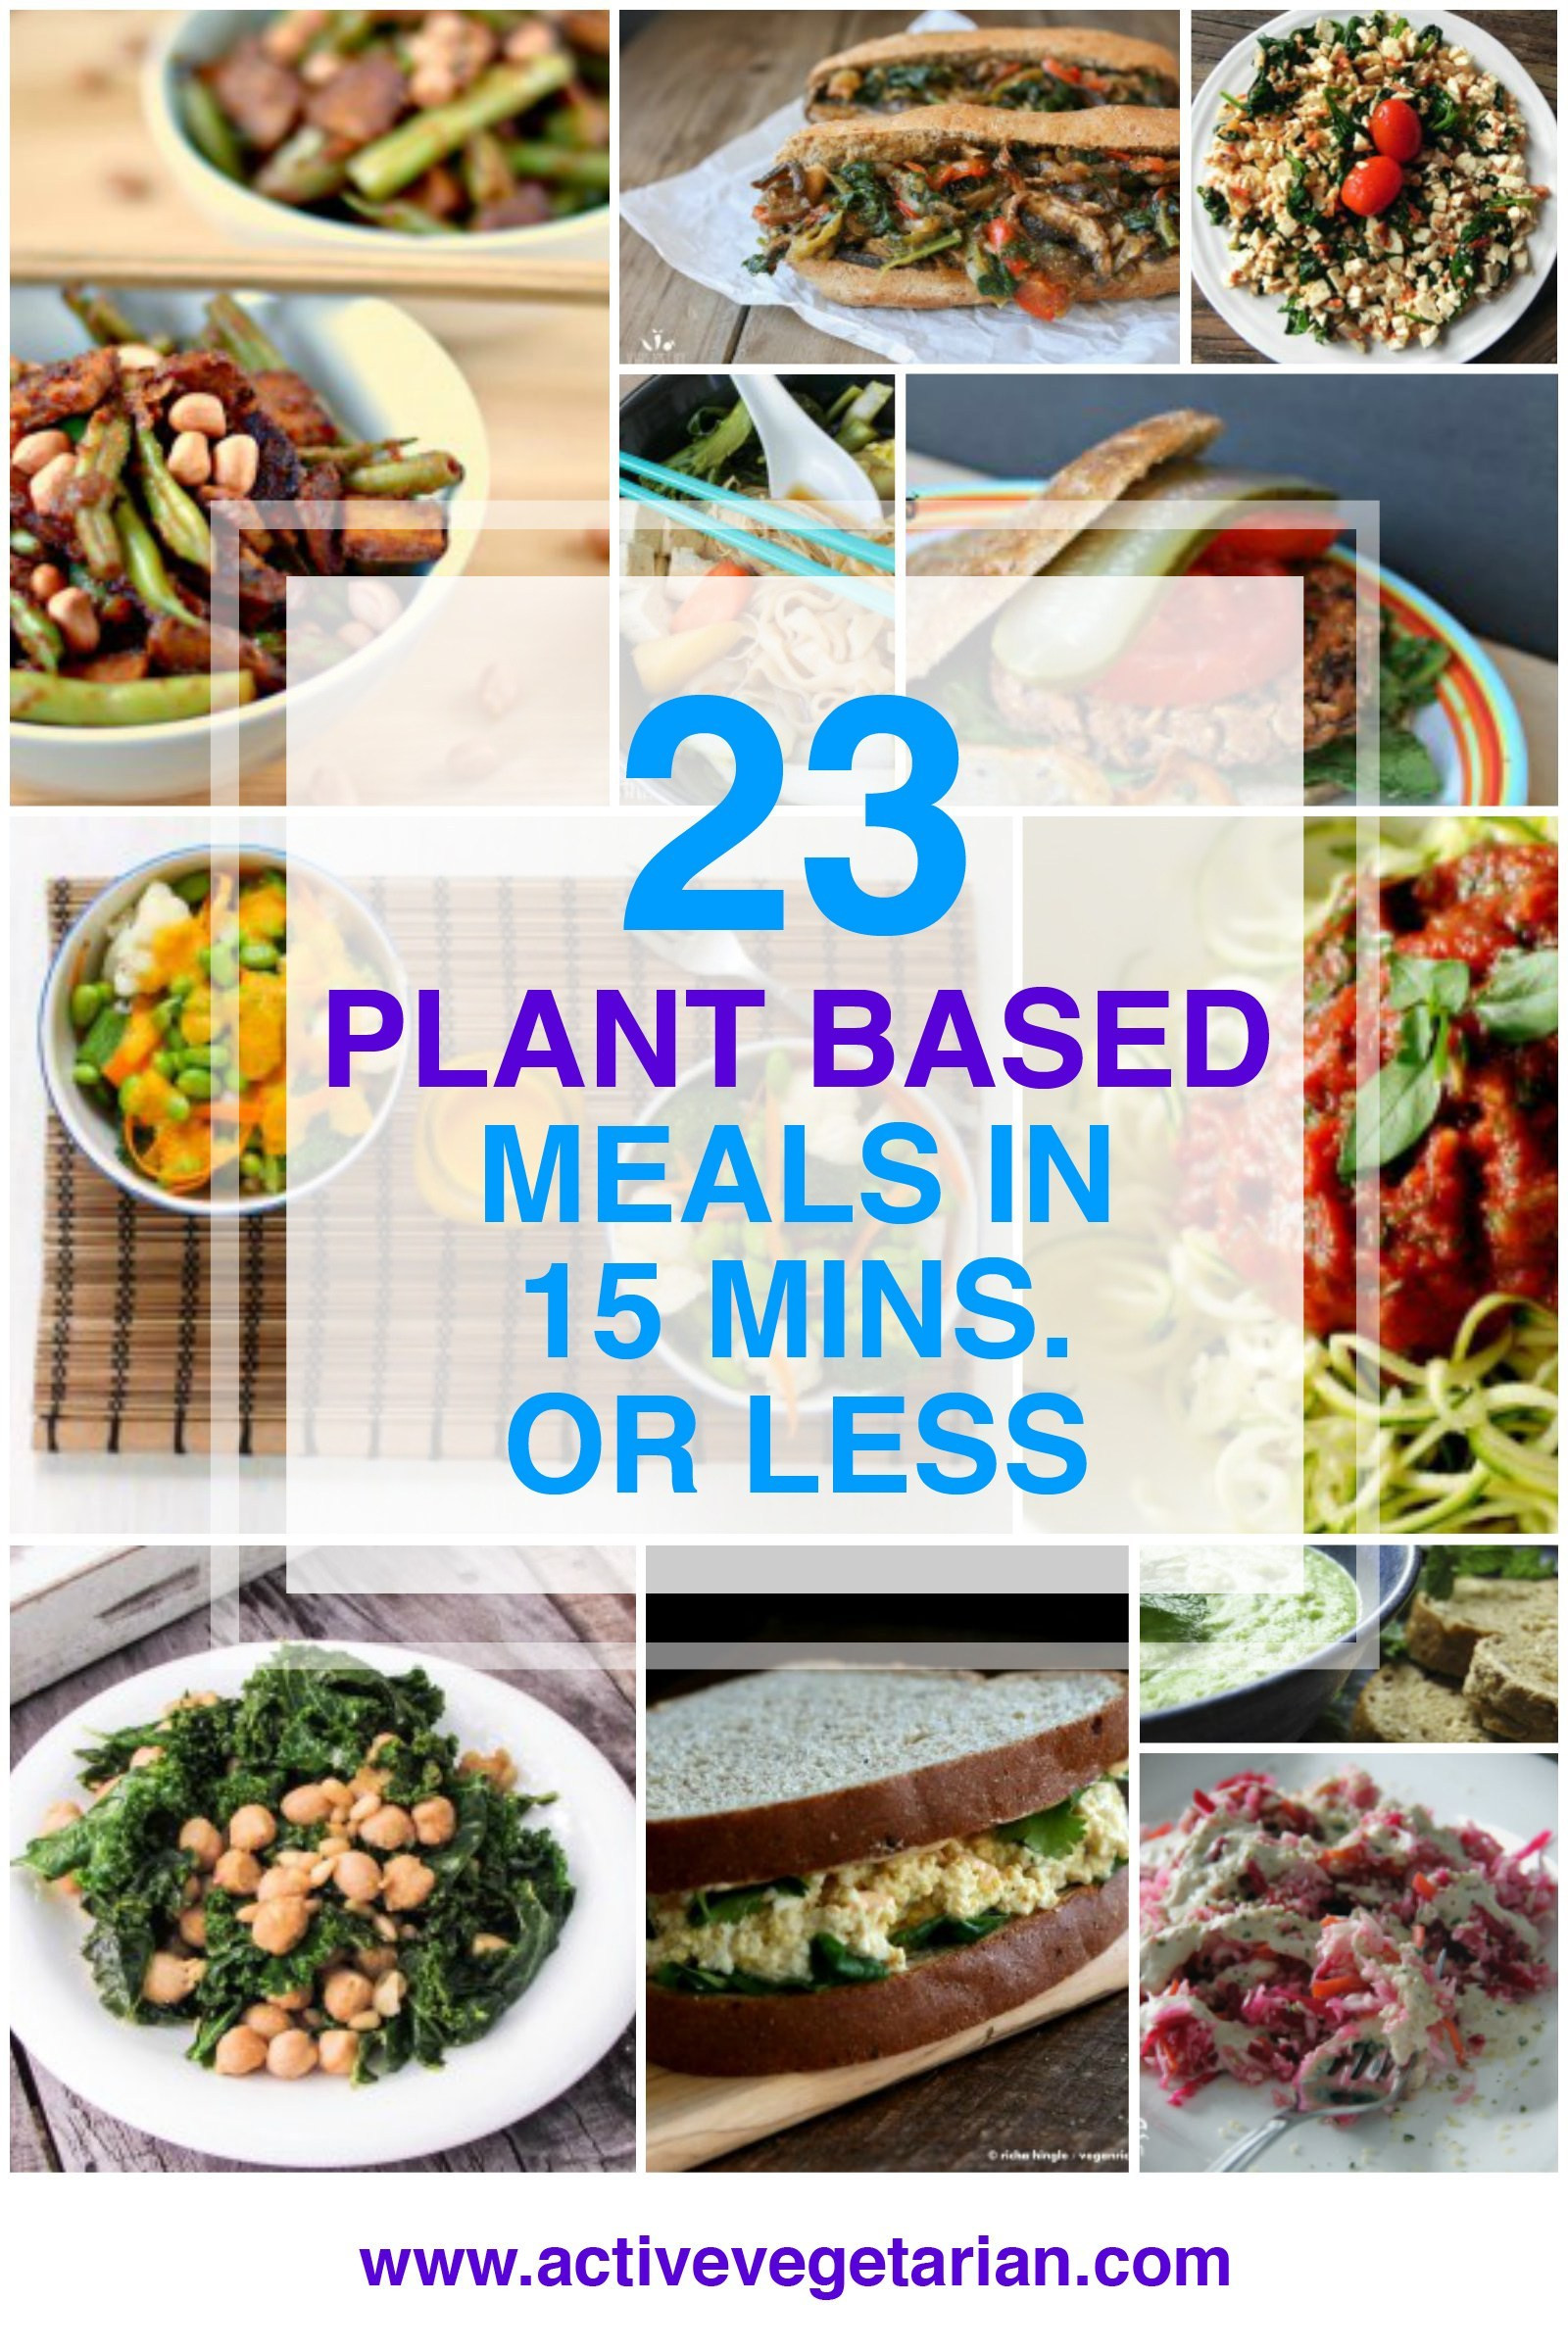 Plant Based Diet Recipes For Weight Loss
 23 Plant Based Meals in 15 Minutes or Less